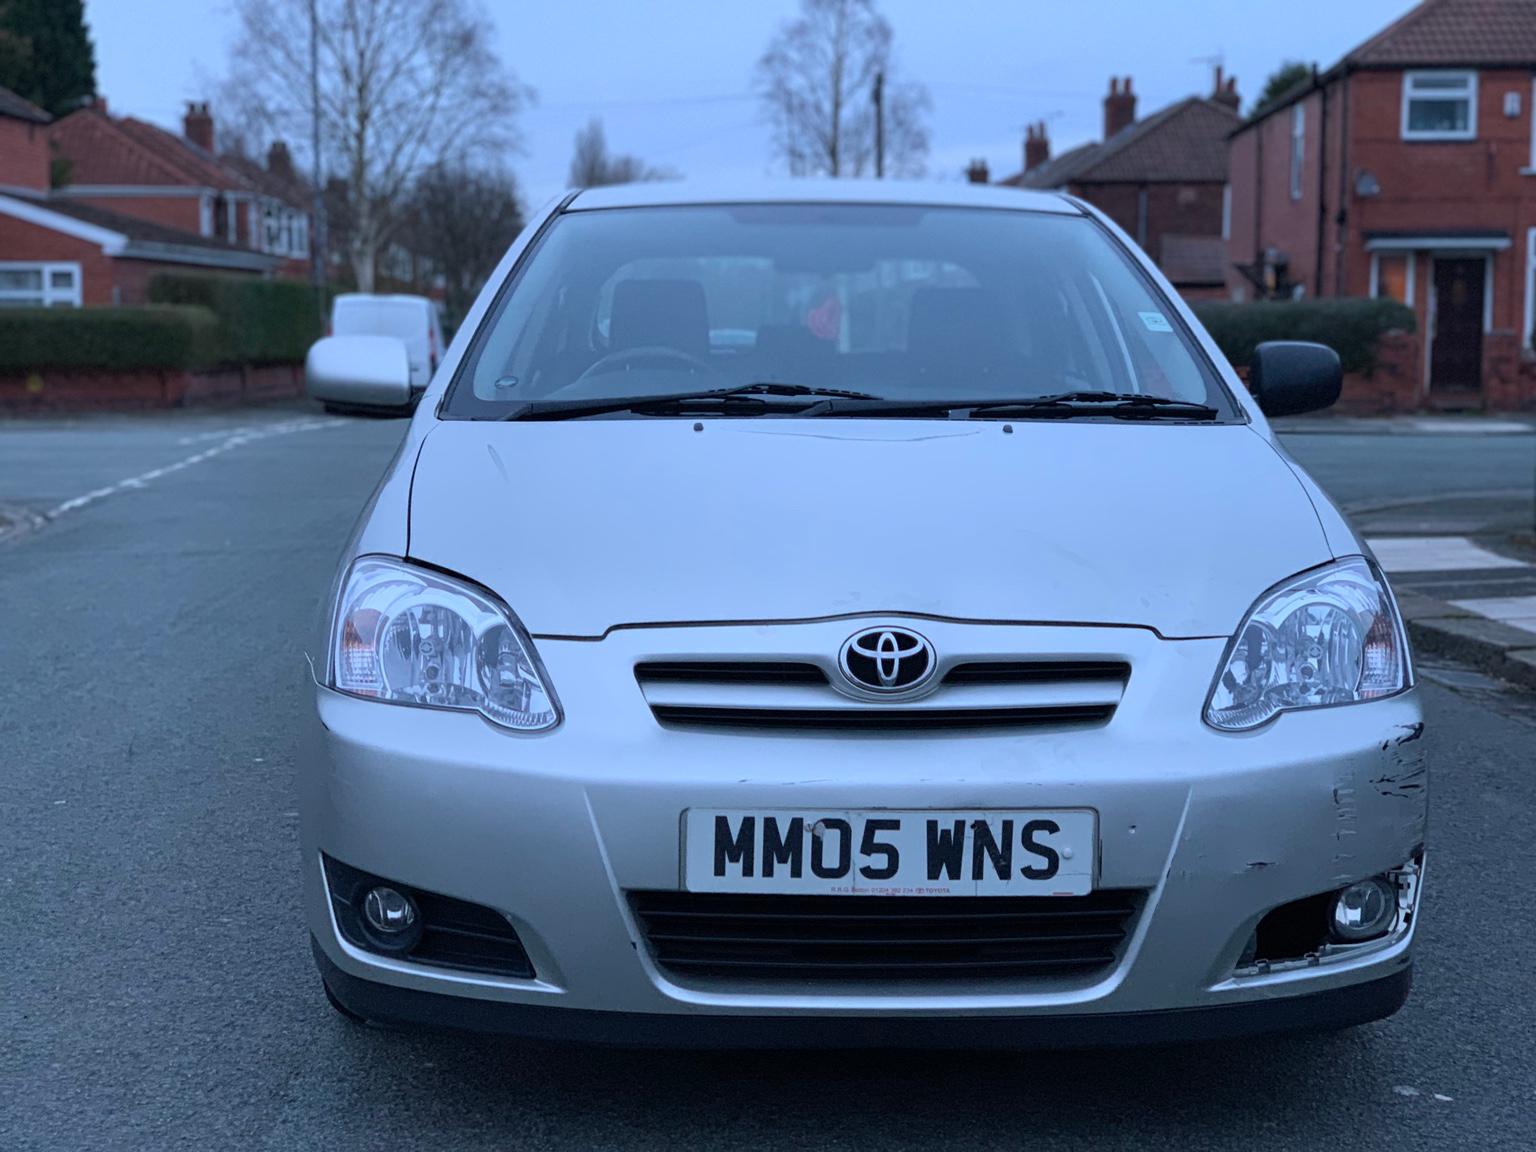 Toyota Corolla 2005 1.4 VVT-i 5dr in M14 Manchester for £1,199.00 for sale | Shpock